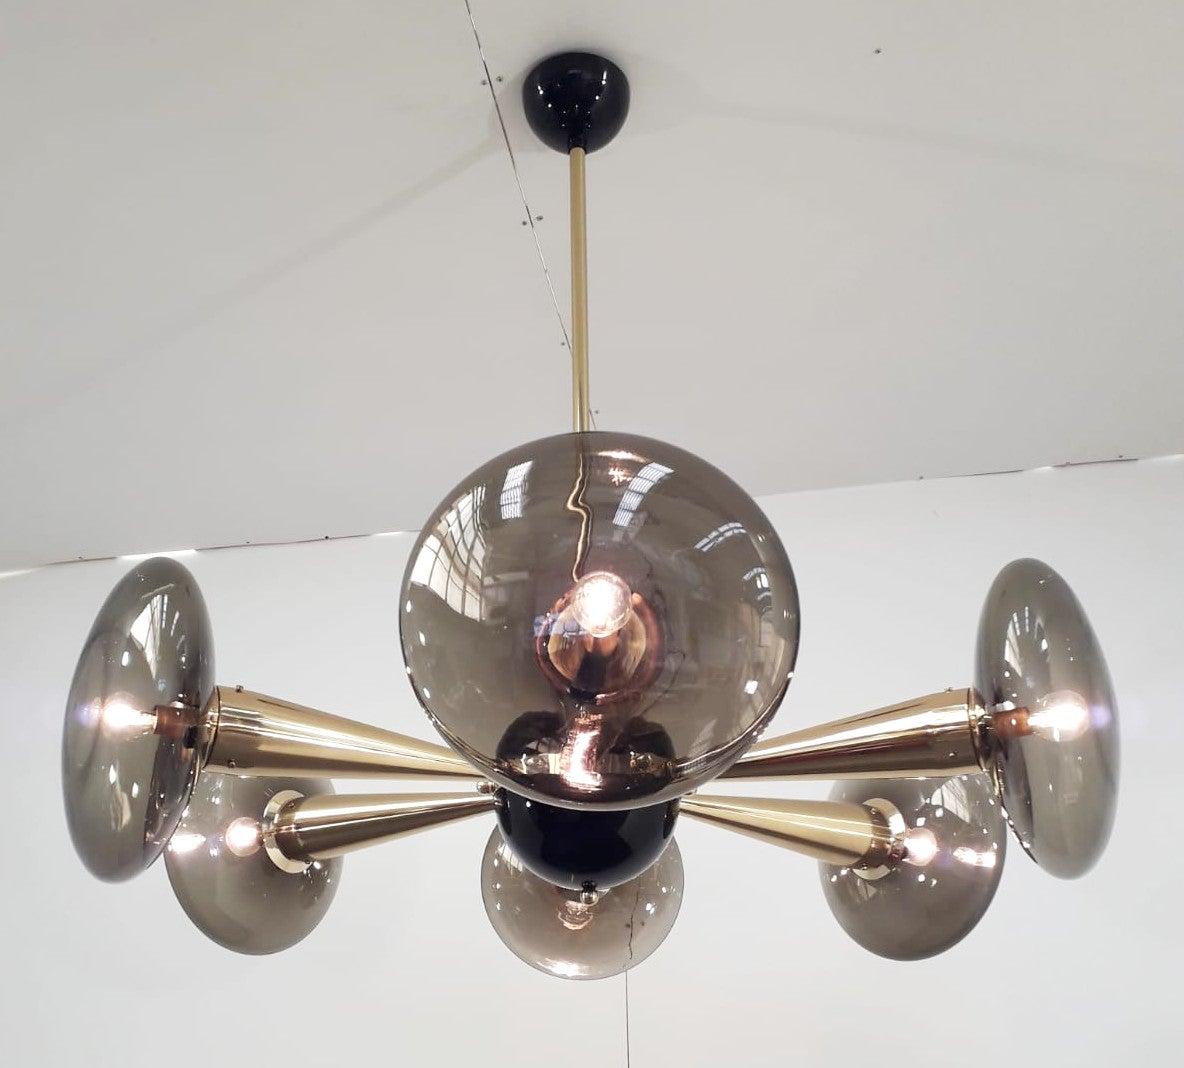 Italian chandelier with smoky Murano glass shades, mounted on newly made polished brass frame with black enameled center and ceiling canopy / Designed by Fabio Bergomi for Fabio Ltd / Made in Italy
6 lights / E12 or E14 type / max 40W each
Measures: